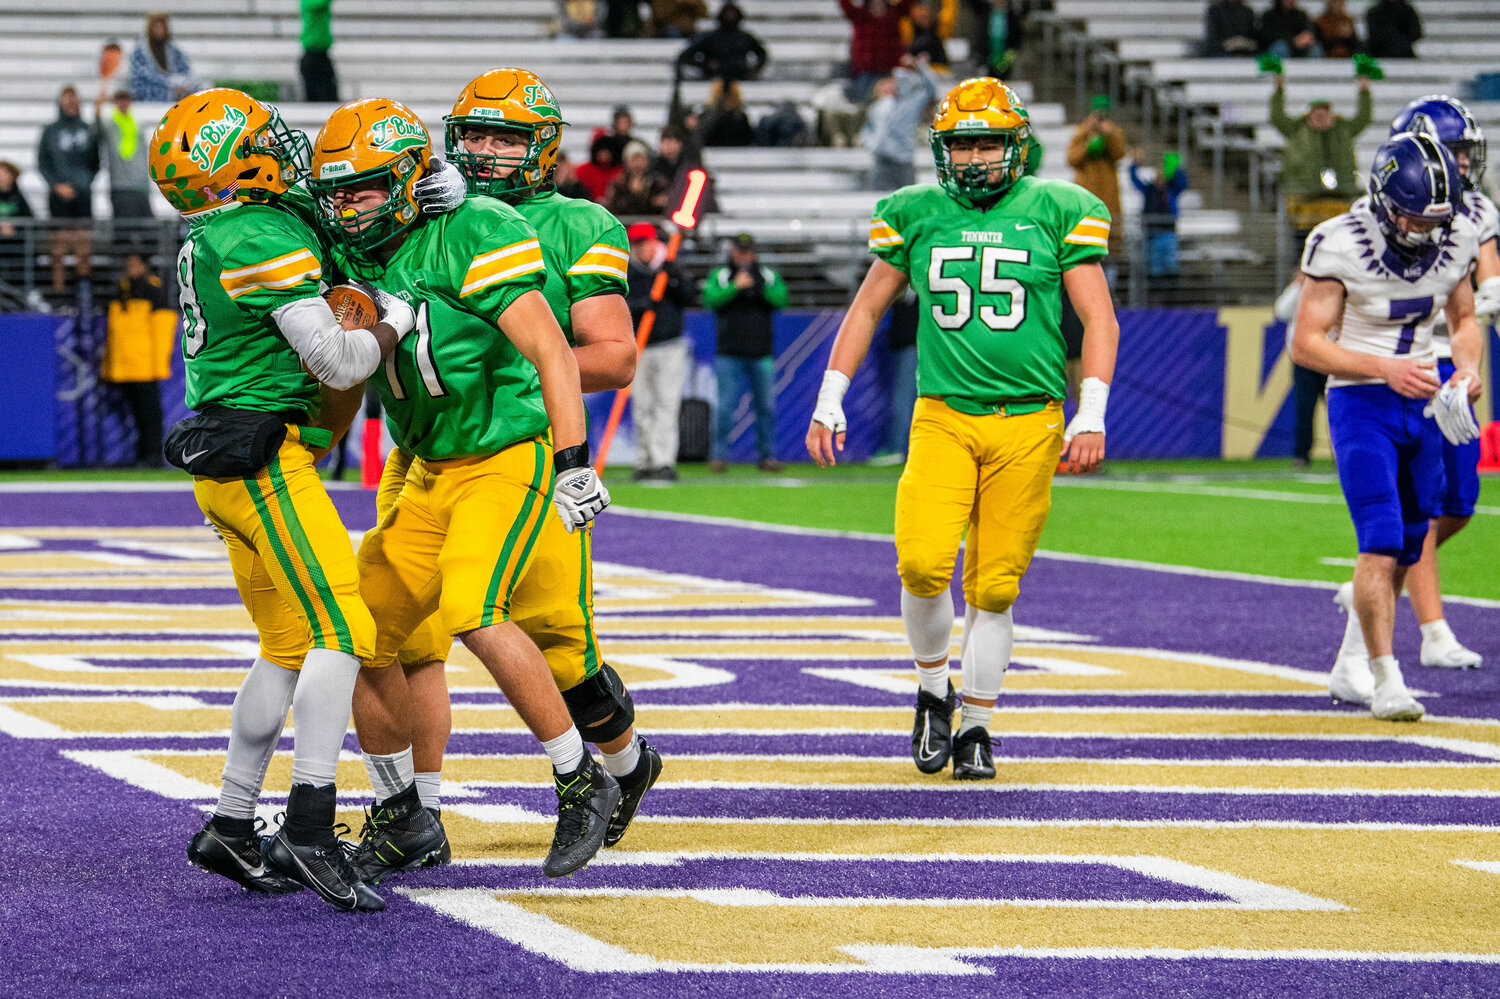 Tumwater Thunderbirds celebrate a touchdown during the 2A State Championship game at Husky Stadium in Seattle on Saturday.